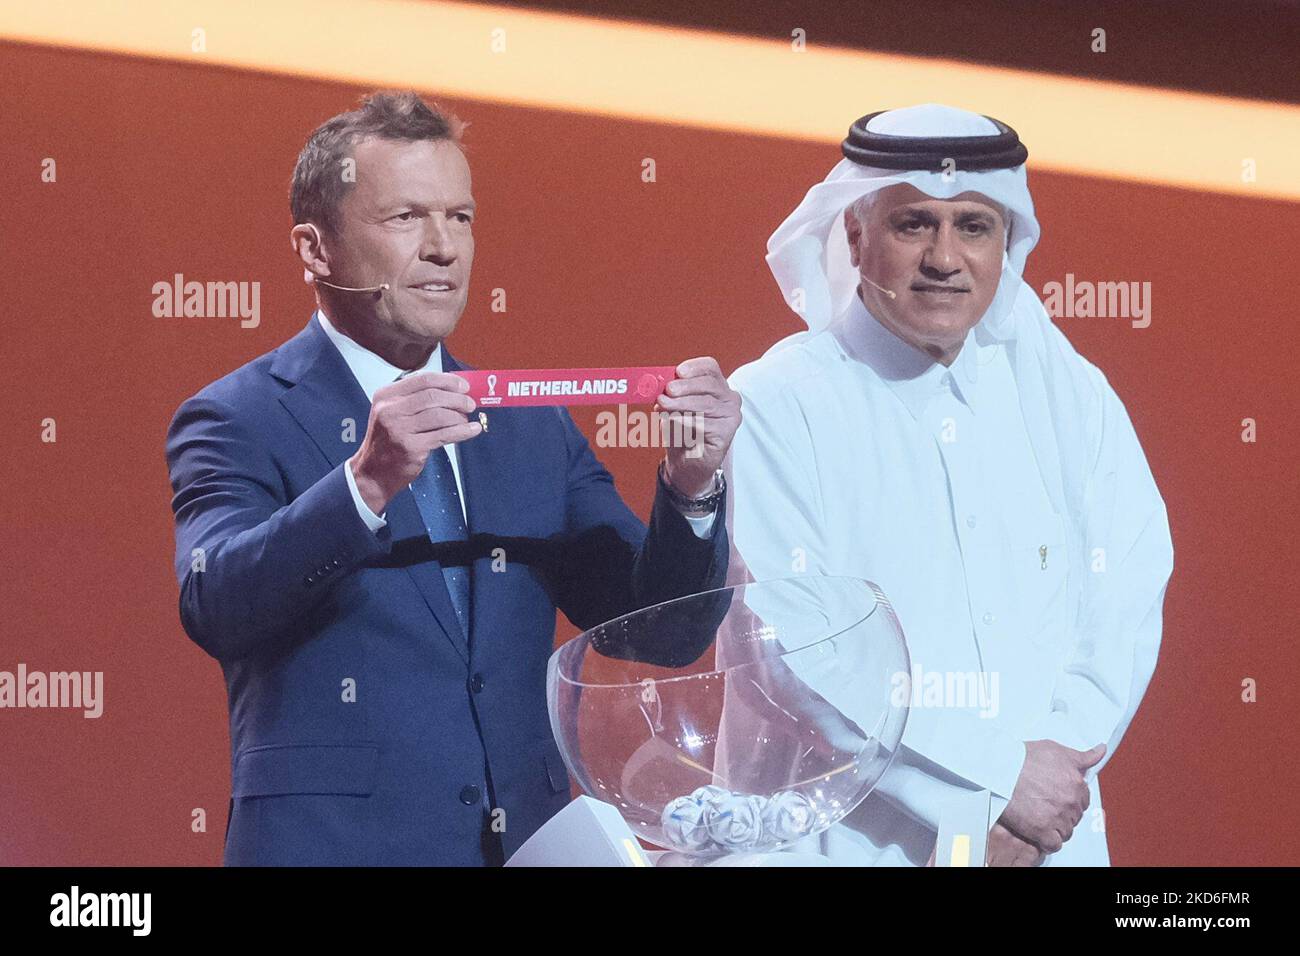 FIFA Legend Lothar Matthaus draws the Netherlands during the FIFA World Cup Qatar 2022 Final Draw at Doha Exhibition and Convention Center on April 1, 2022 in Doha, Qatar. (Photo by Simon Holmes/NurPhoto) Stock Photo